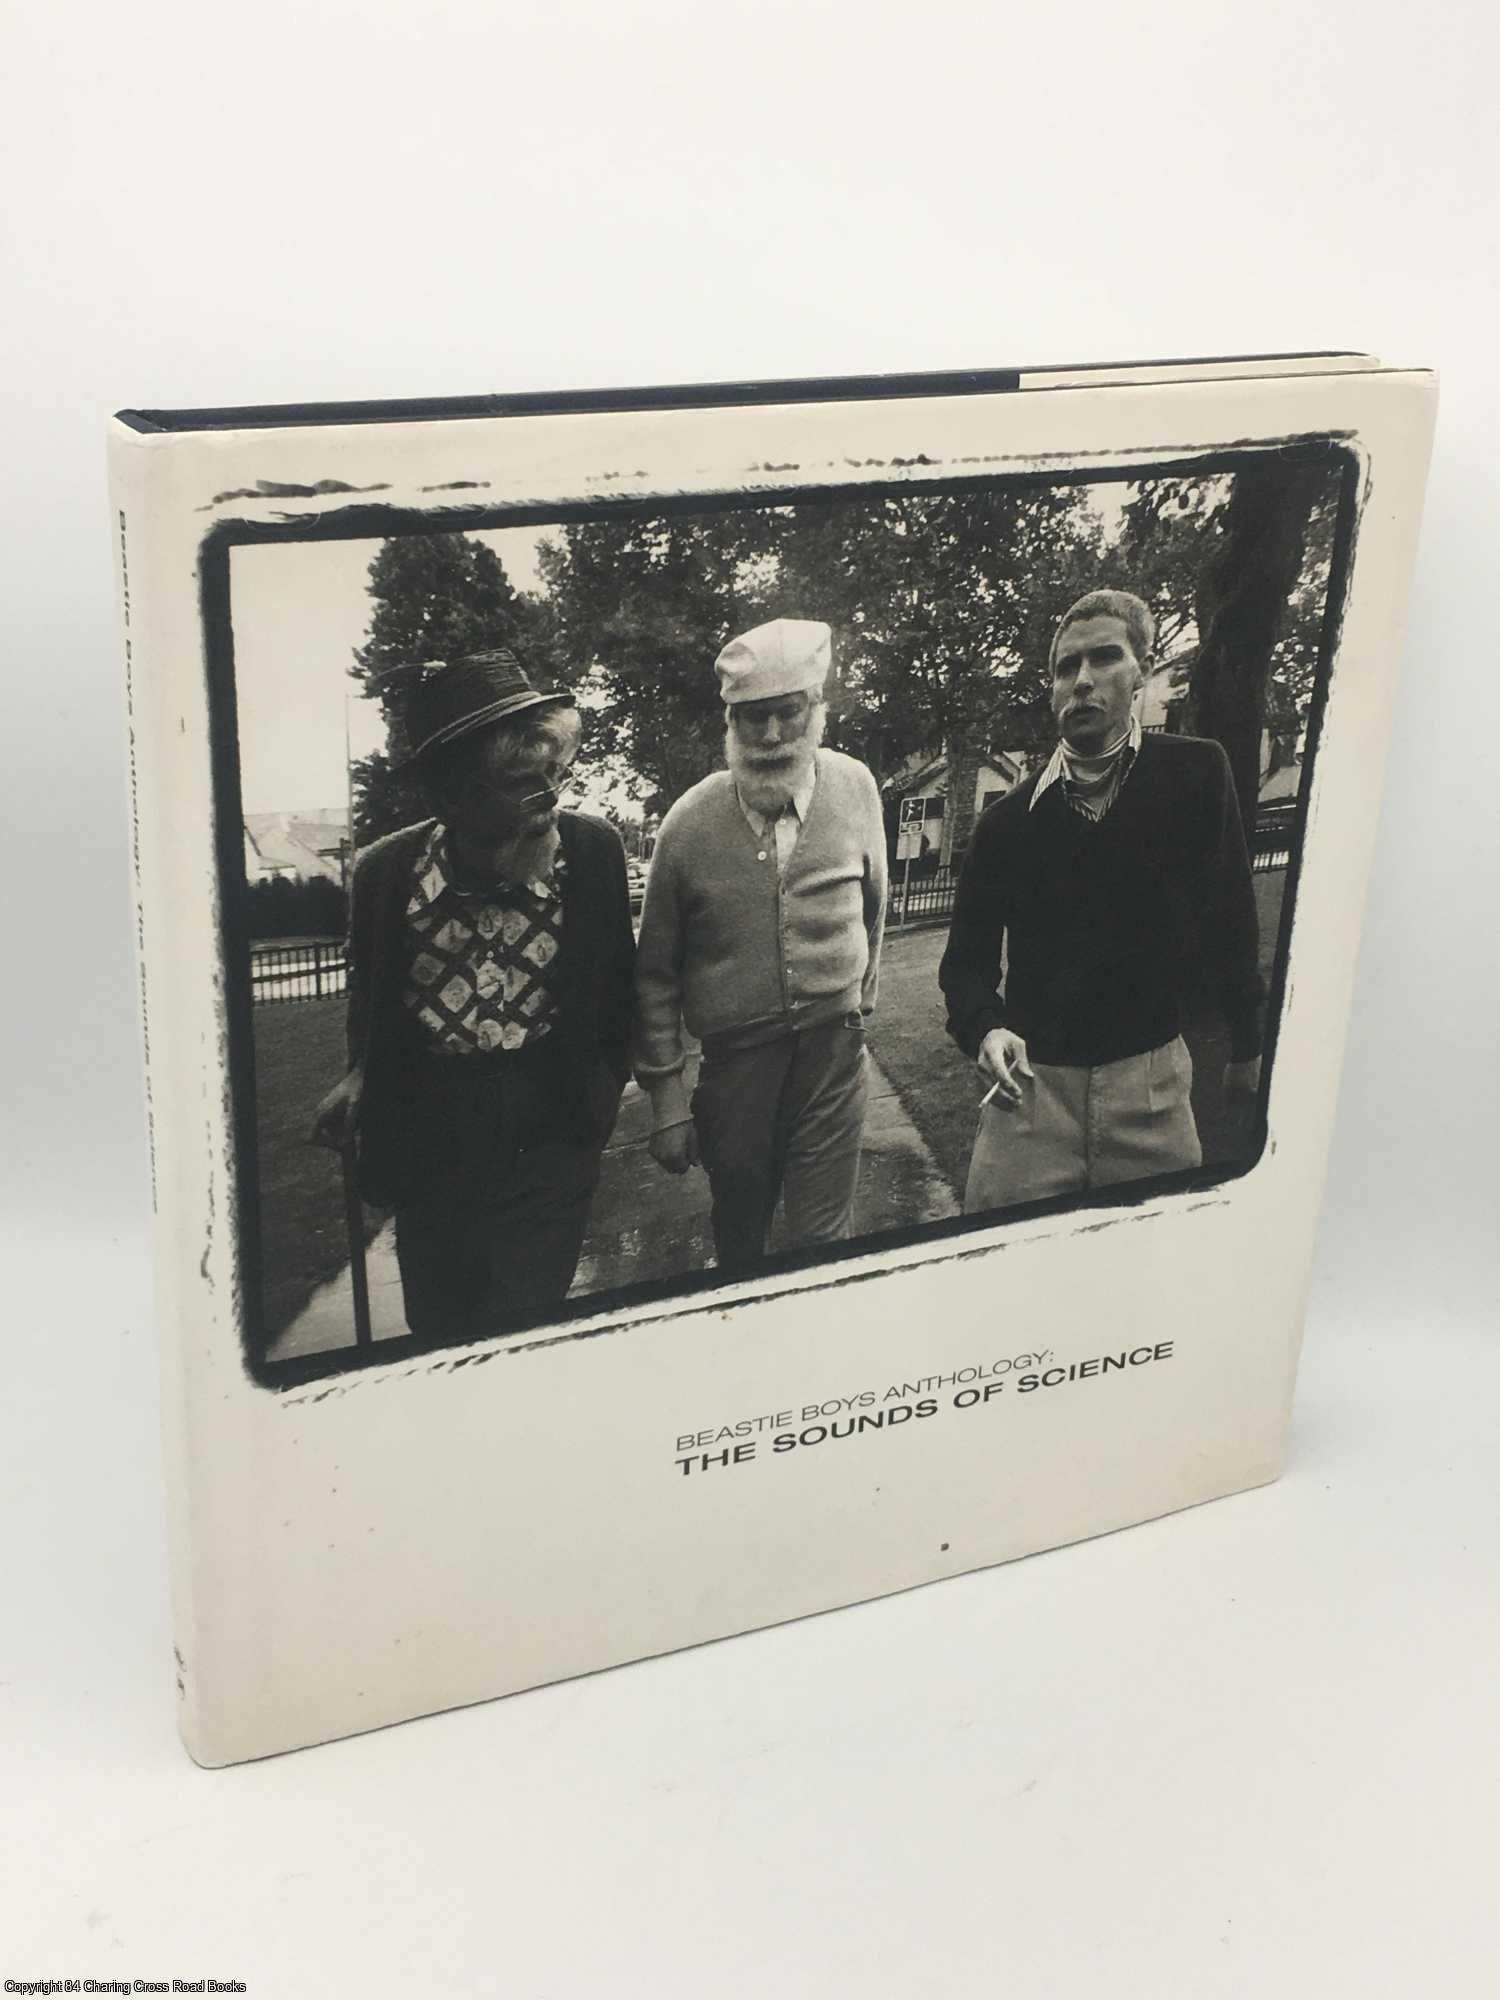 Boys, Beastie - Beastie Boys Anthology: The Sounds of Science